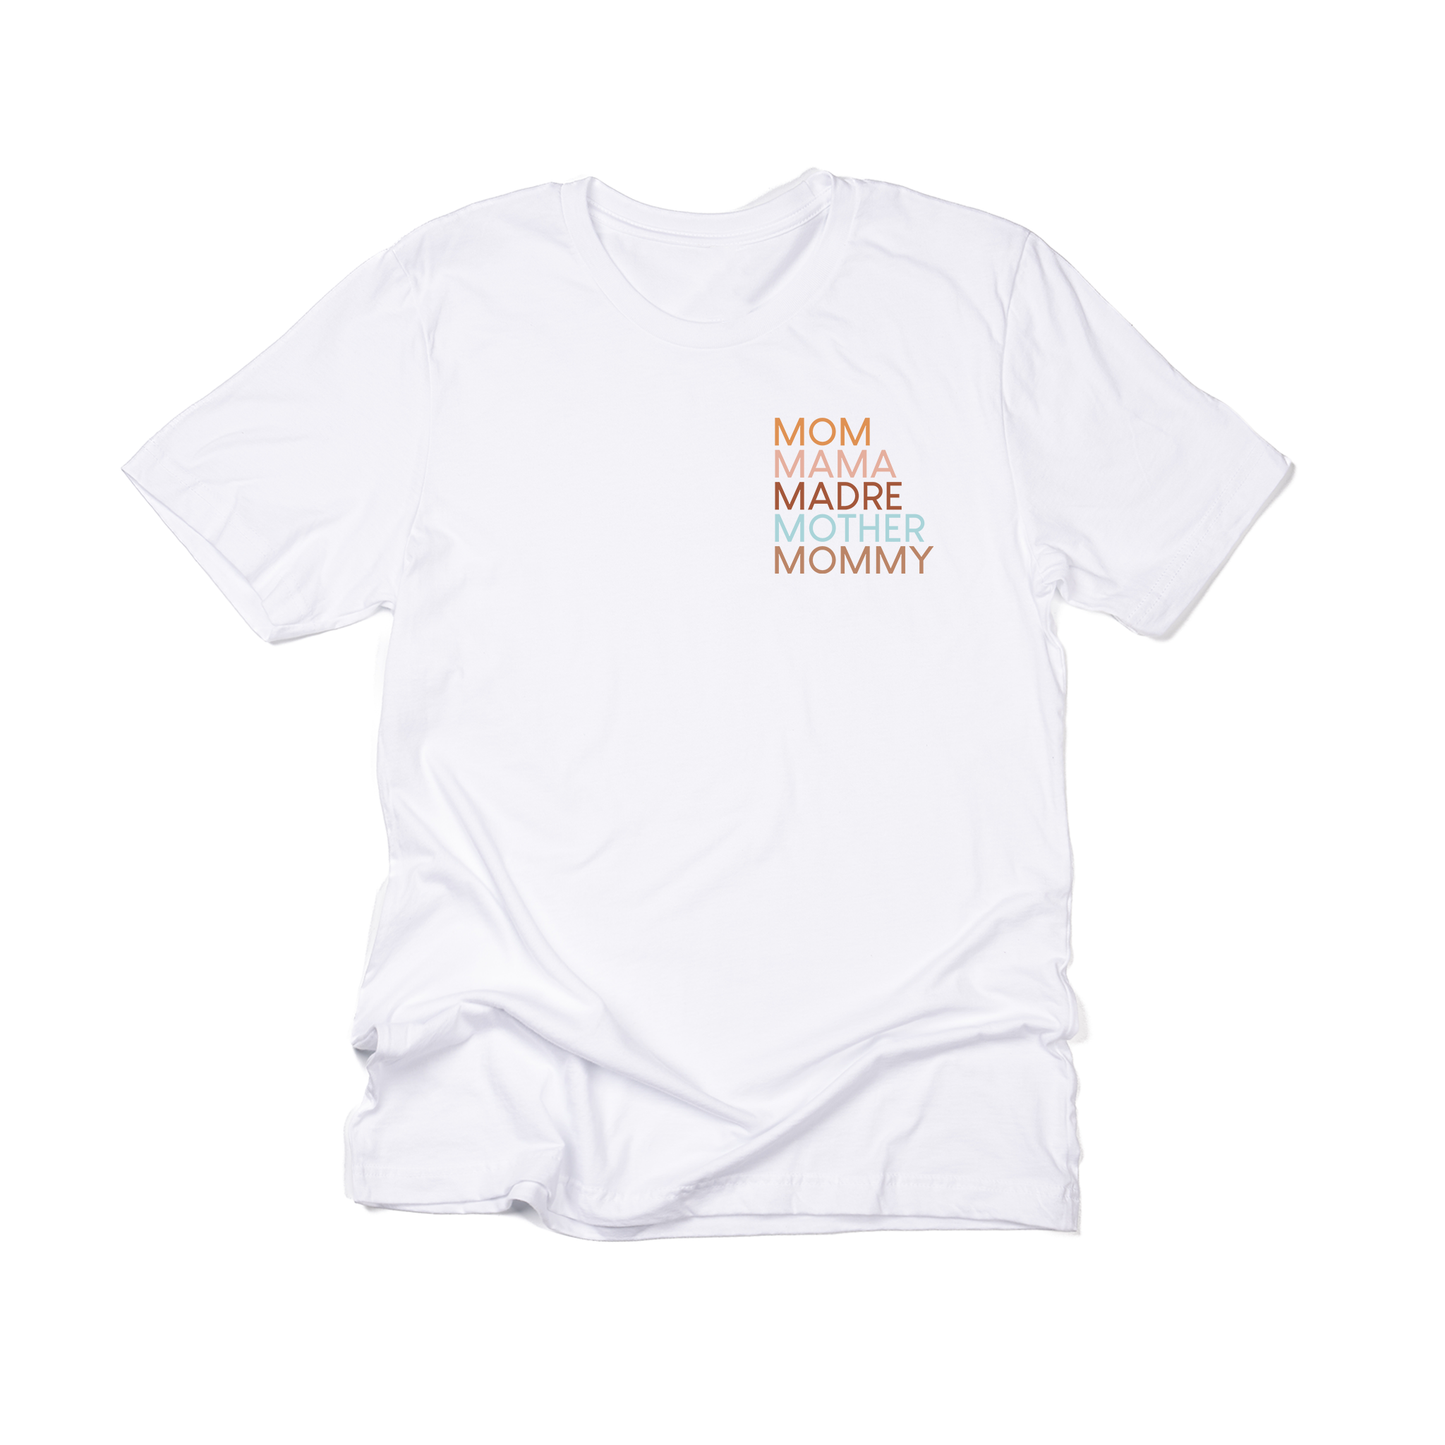 Mom Mama Madre Mother Mommy (Pocket) - Tee (White)